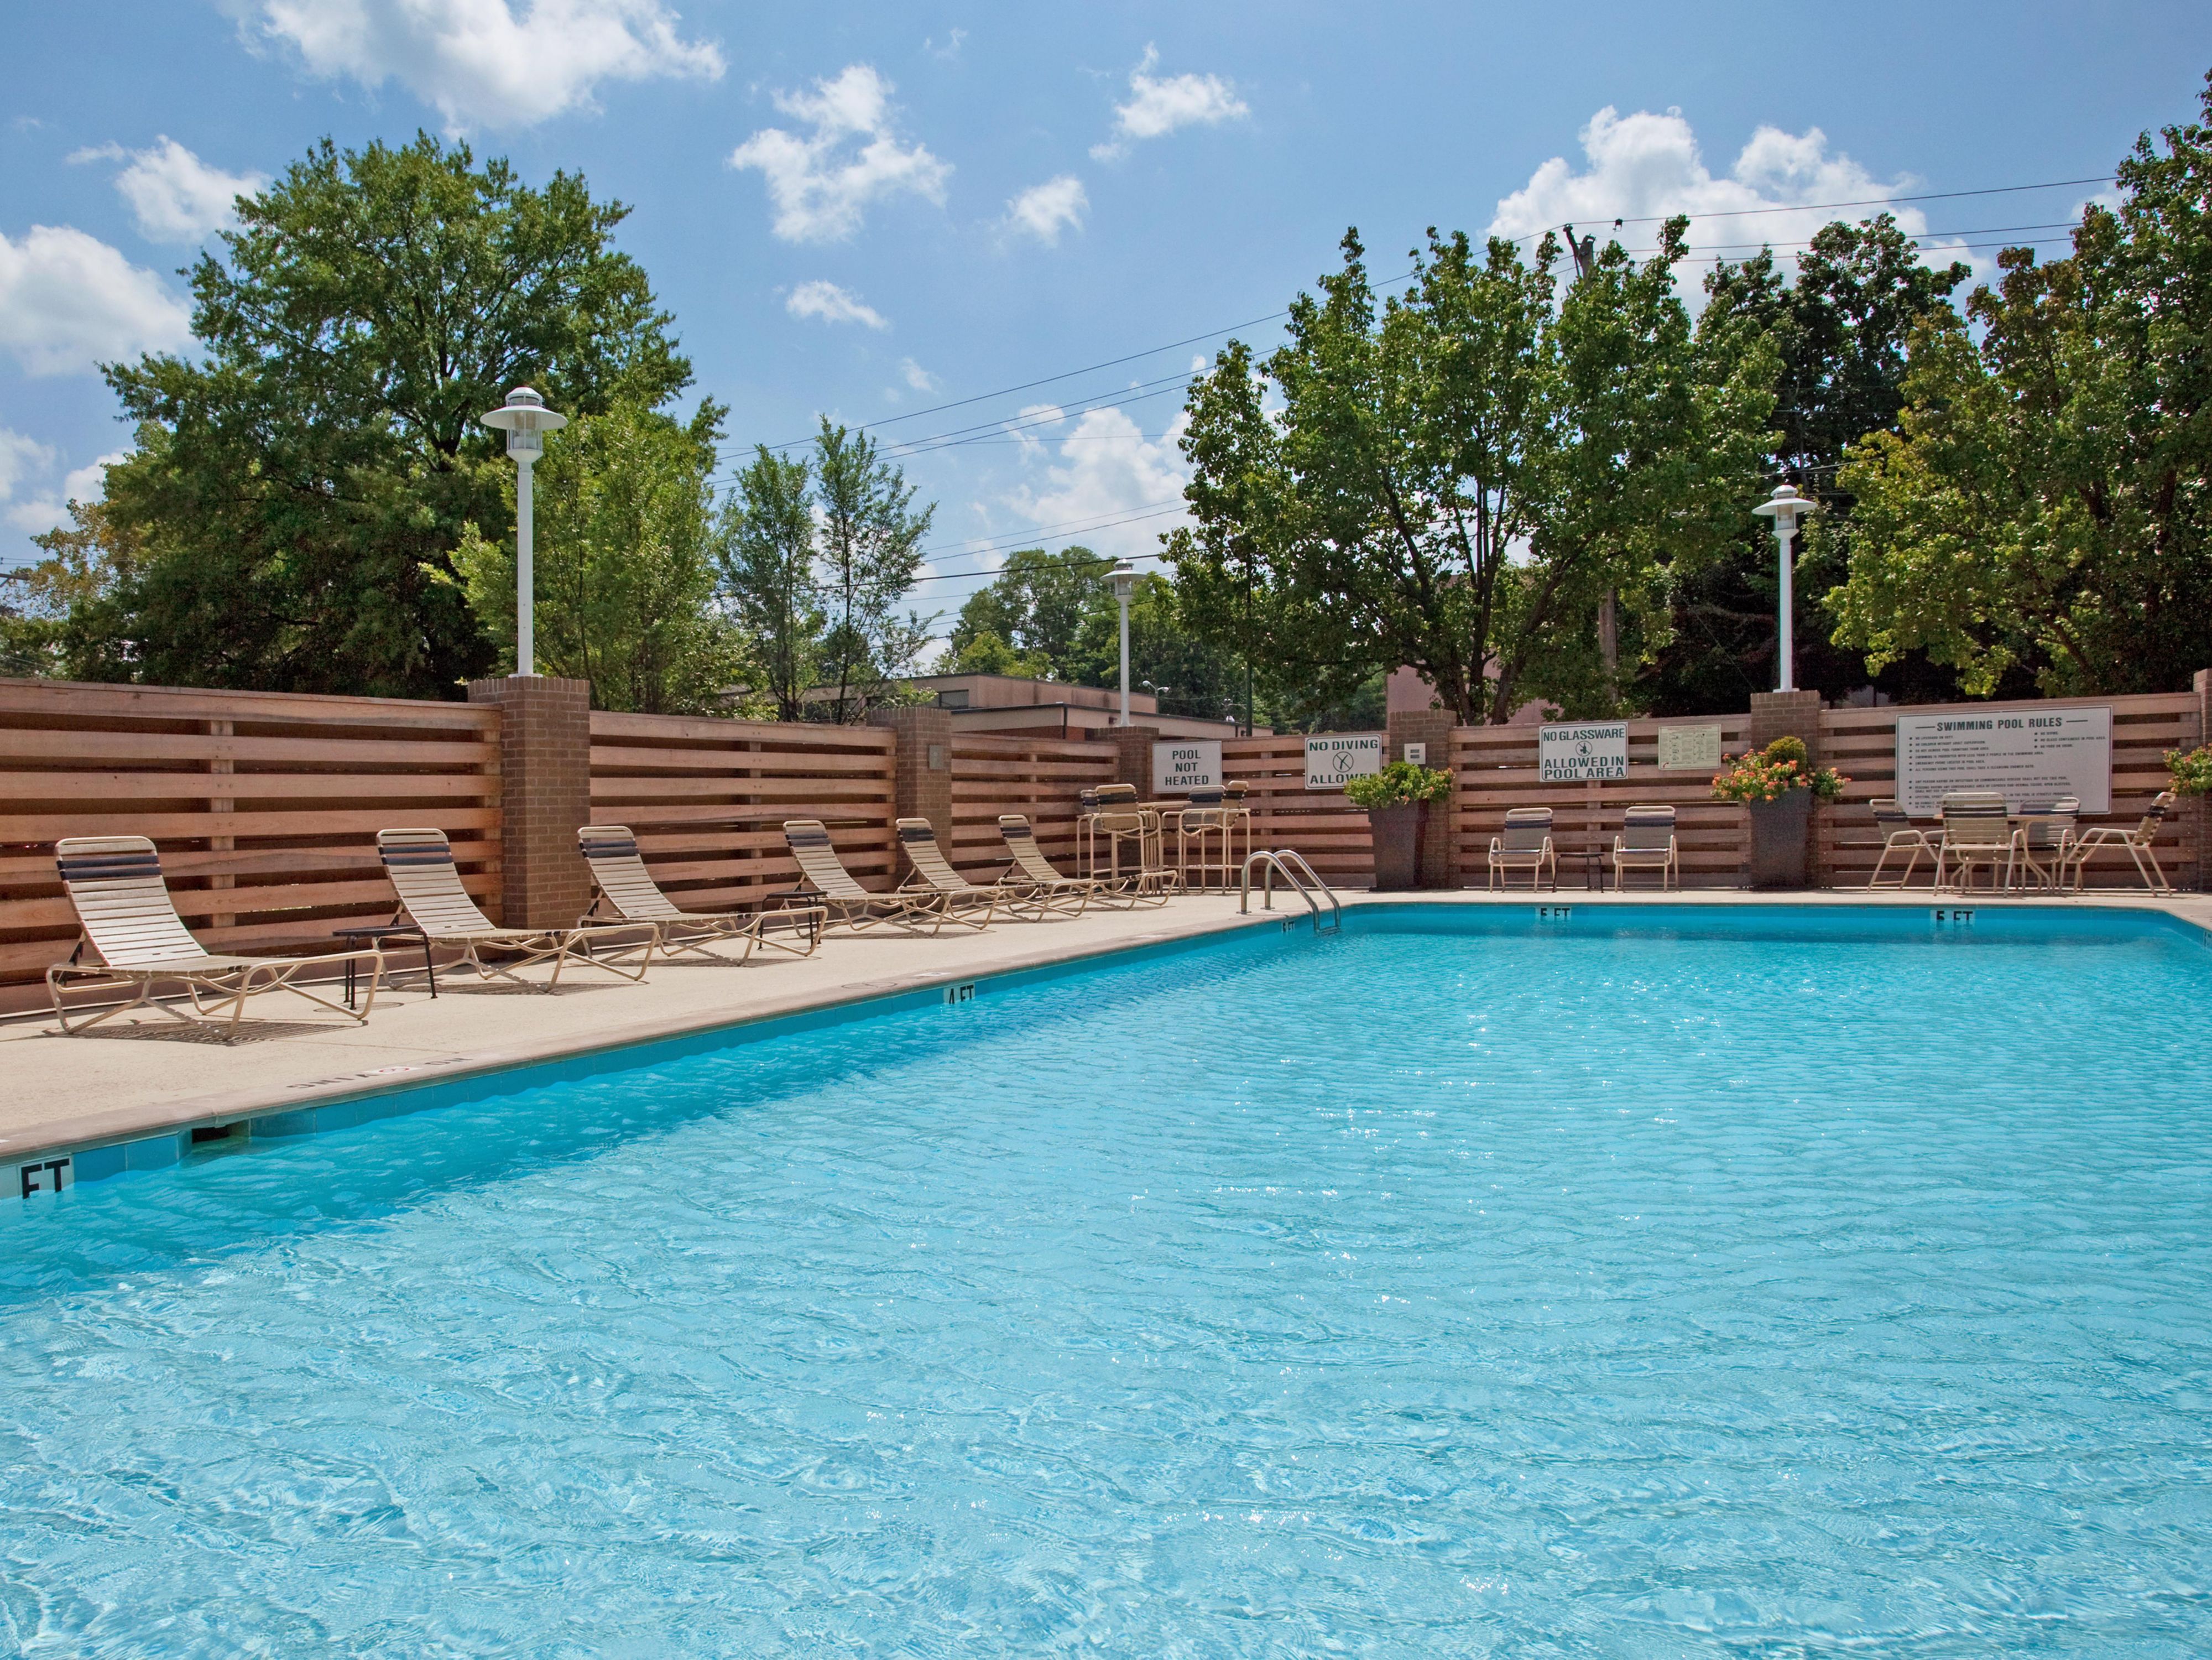 Enjoy our large outdoor seasonal pool during the hot summer days. 